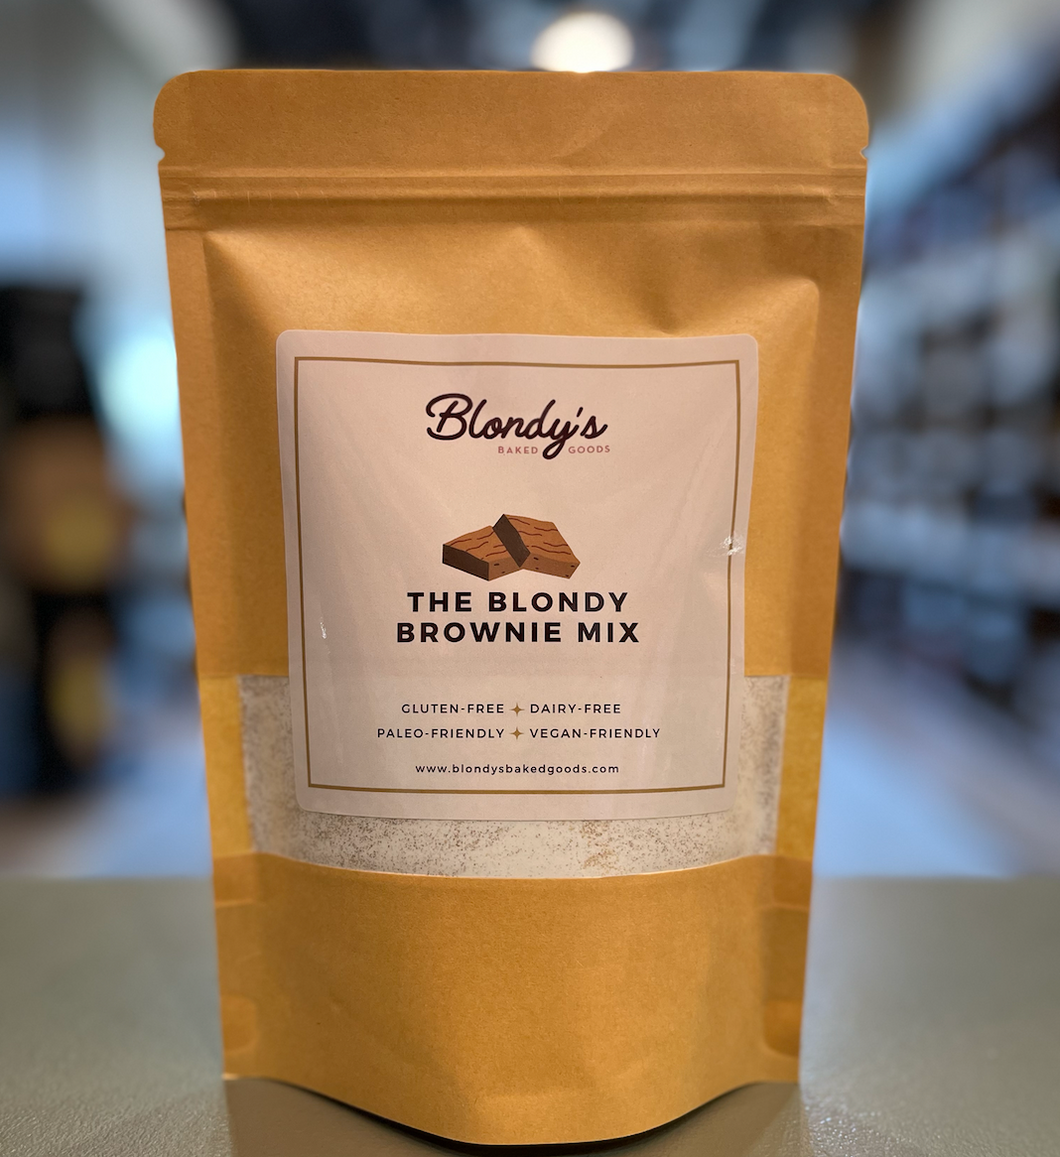 Blondy's The Blondy Brownie Mix